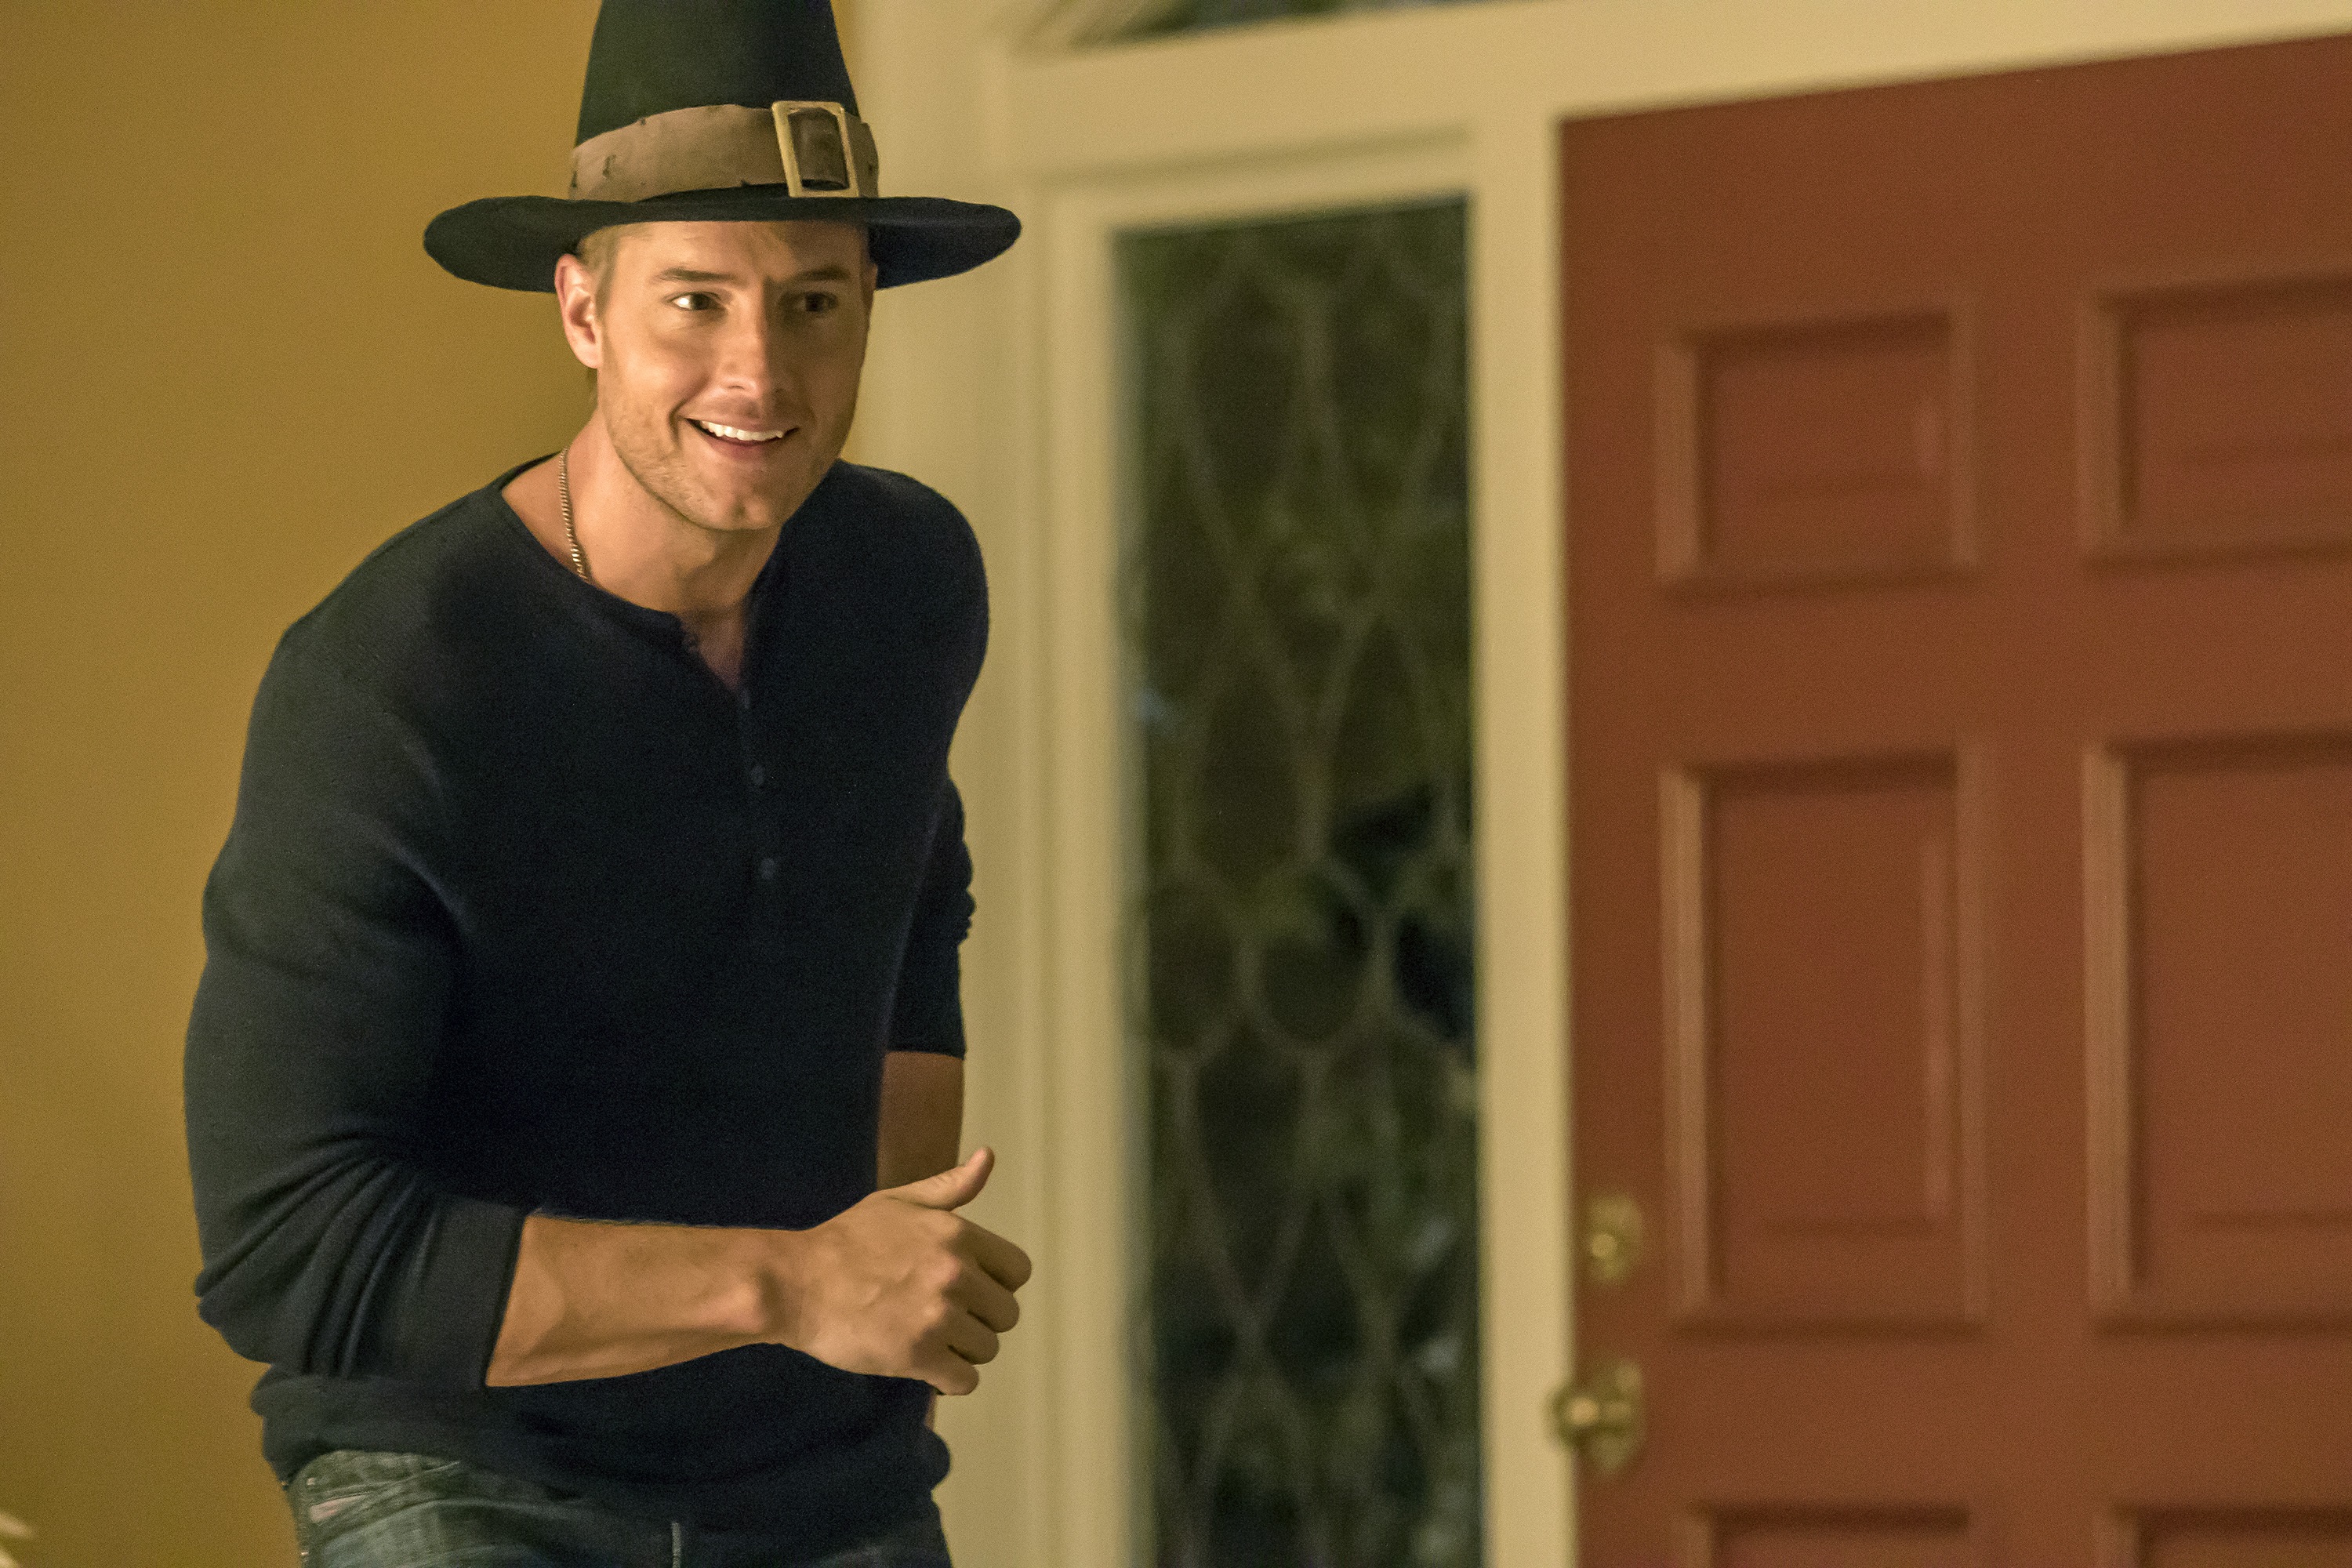 'This Is Us' star Justin Hartley as Kevin Pearson